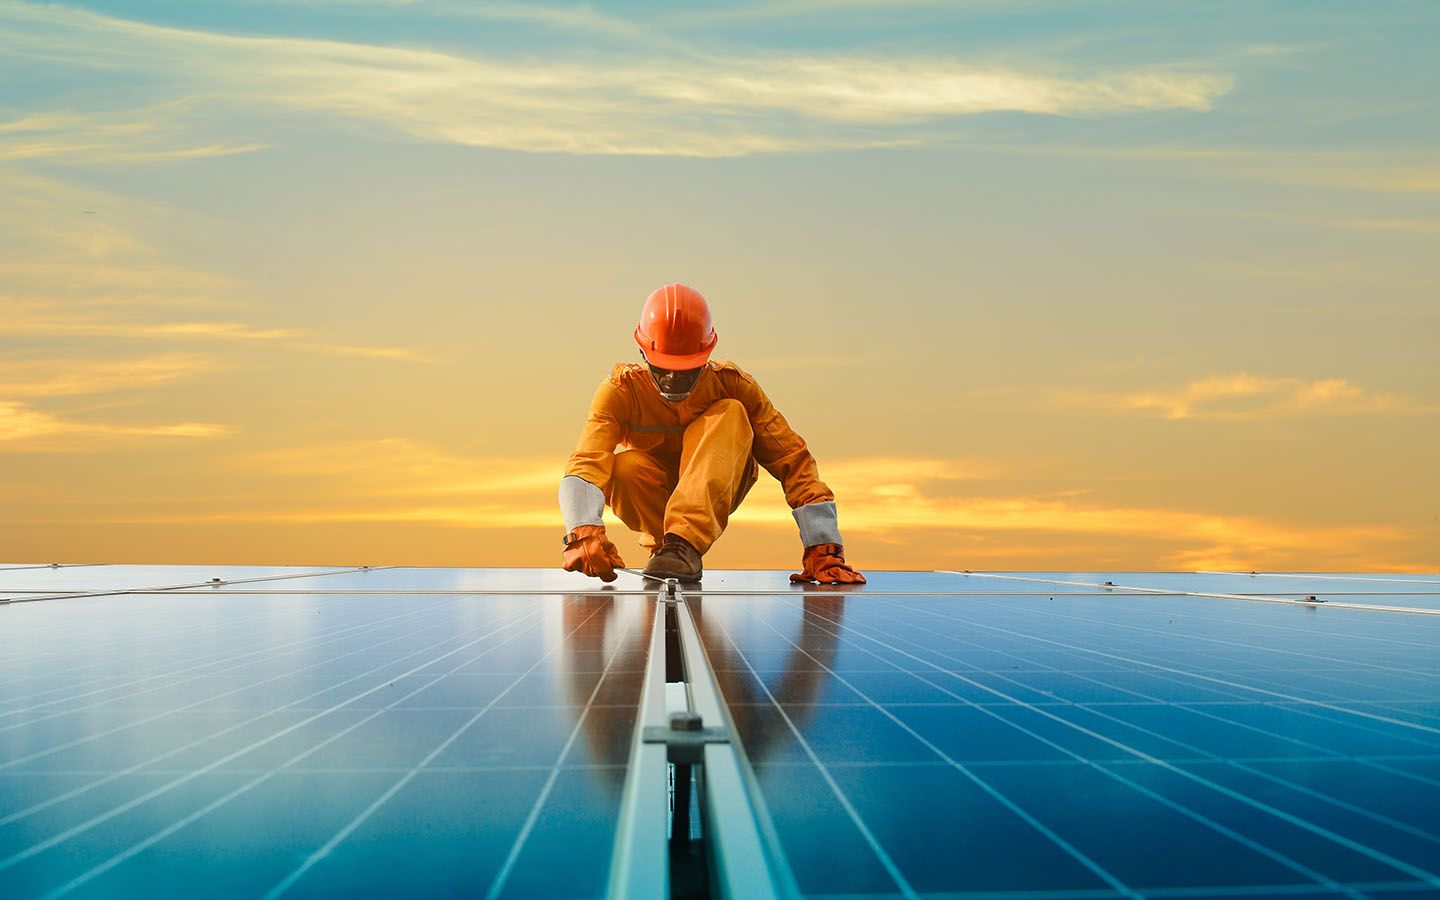 What YOU Need to know about going Solar - Evergreen4life